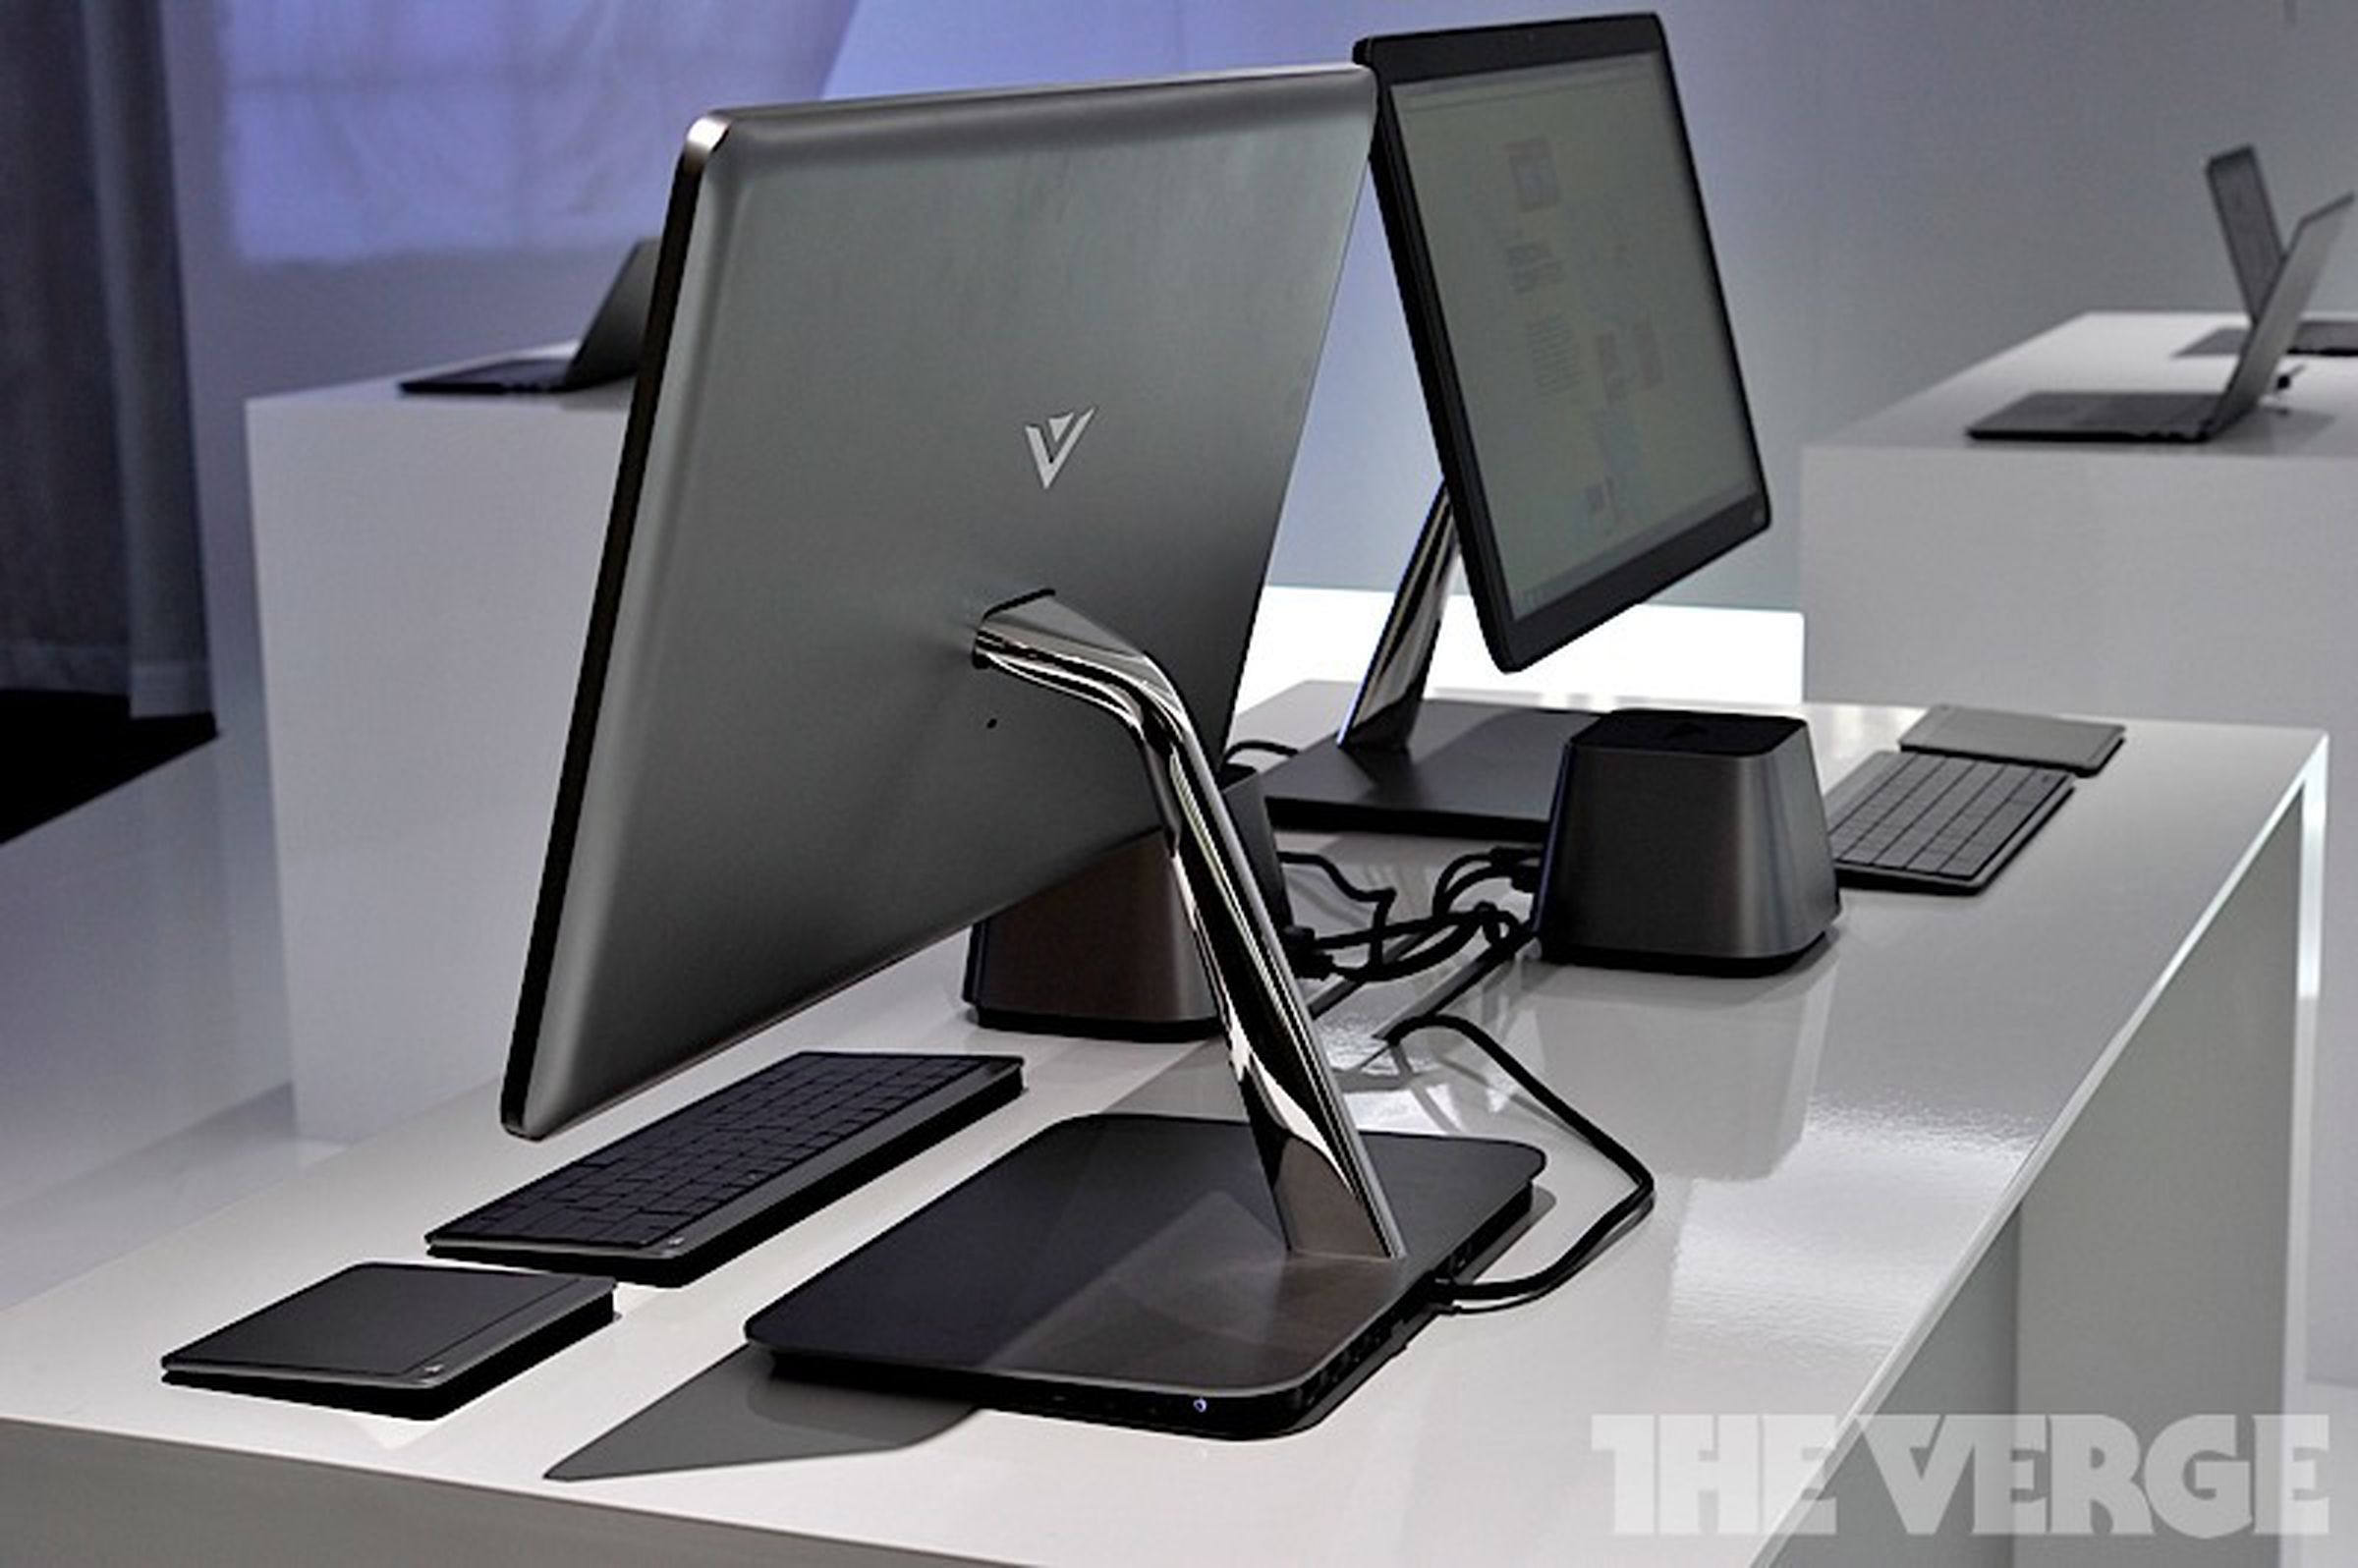 Vizio all-in-one PC hands-on pictures